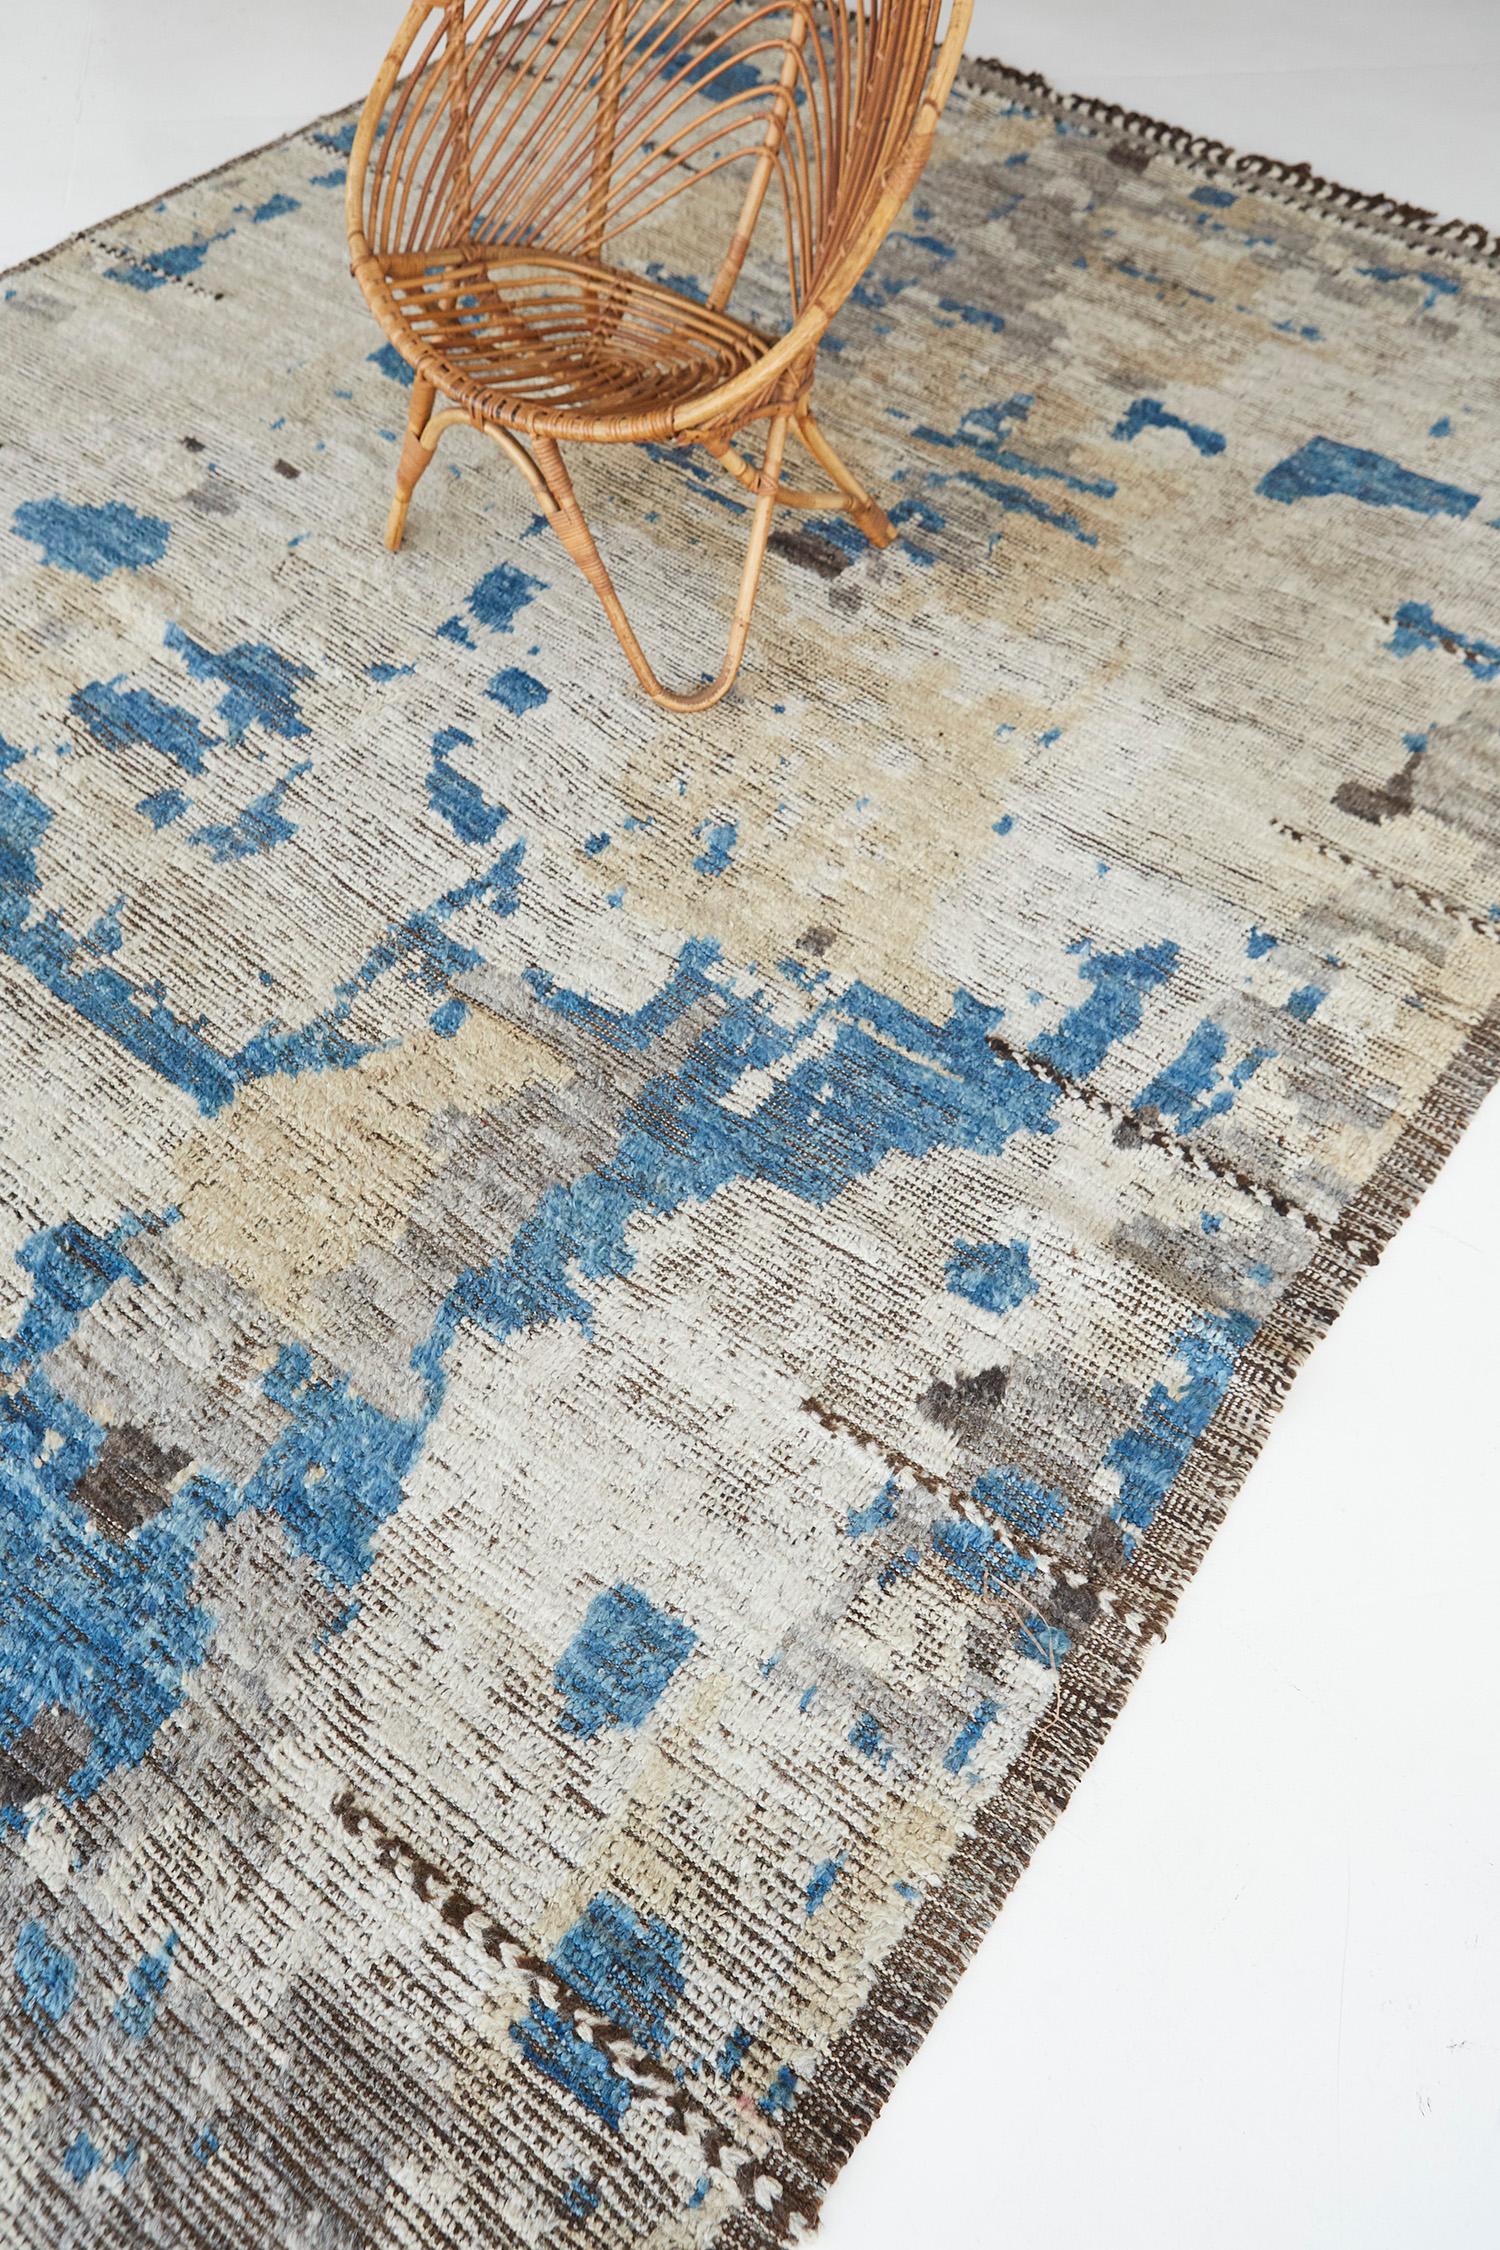 Benhaddou is a beautiful textured rug with embossed detailing into an overall geometric and contemporary design. Line work moving irregularly brings movement and are inspired by the Atlas Mountains in Morocco for the modern design world. The rug's